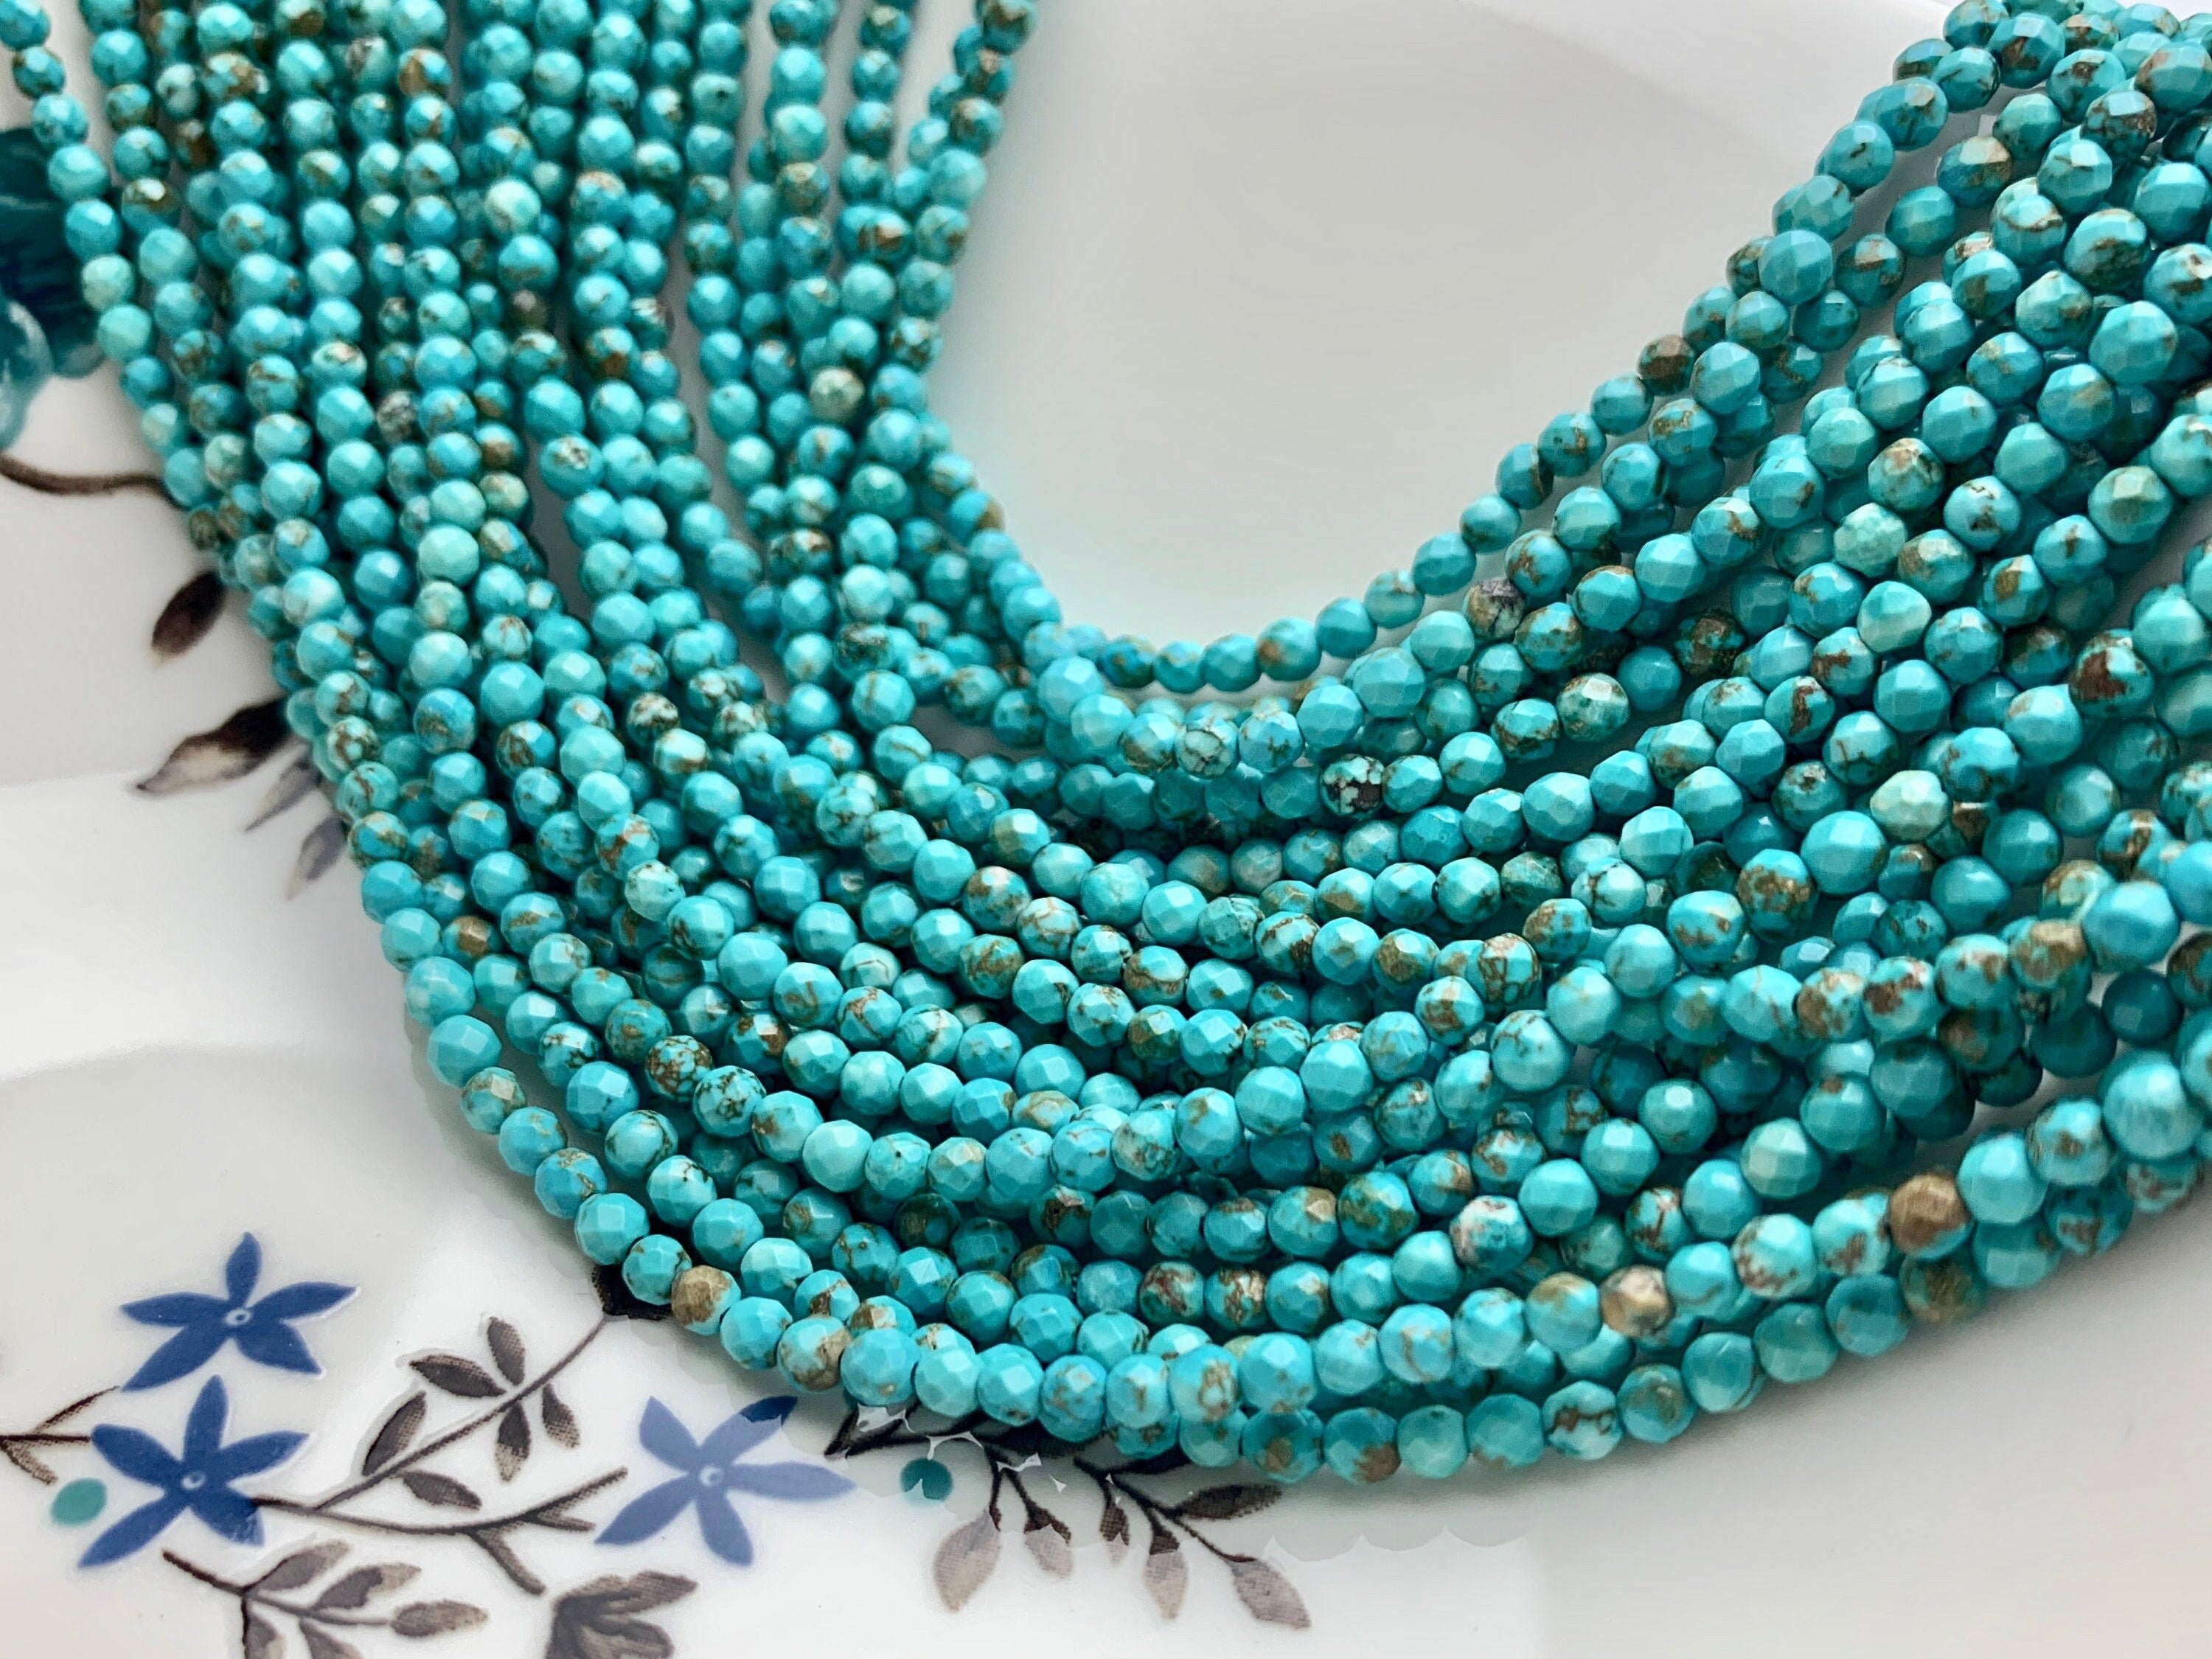  Song Xi 130pcs Faceted African Turquoise Stone Beads 3x2mm  Briolette Stone Beads Loose Natural Stone Beads for Jewelry Making : Arts,  Crafts & Sewing